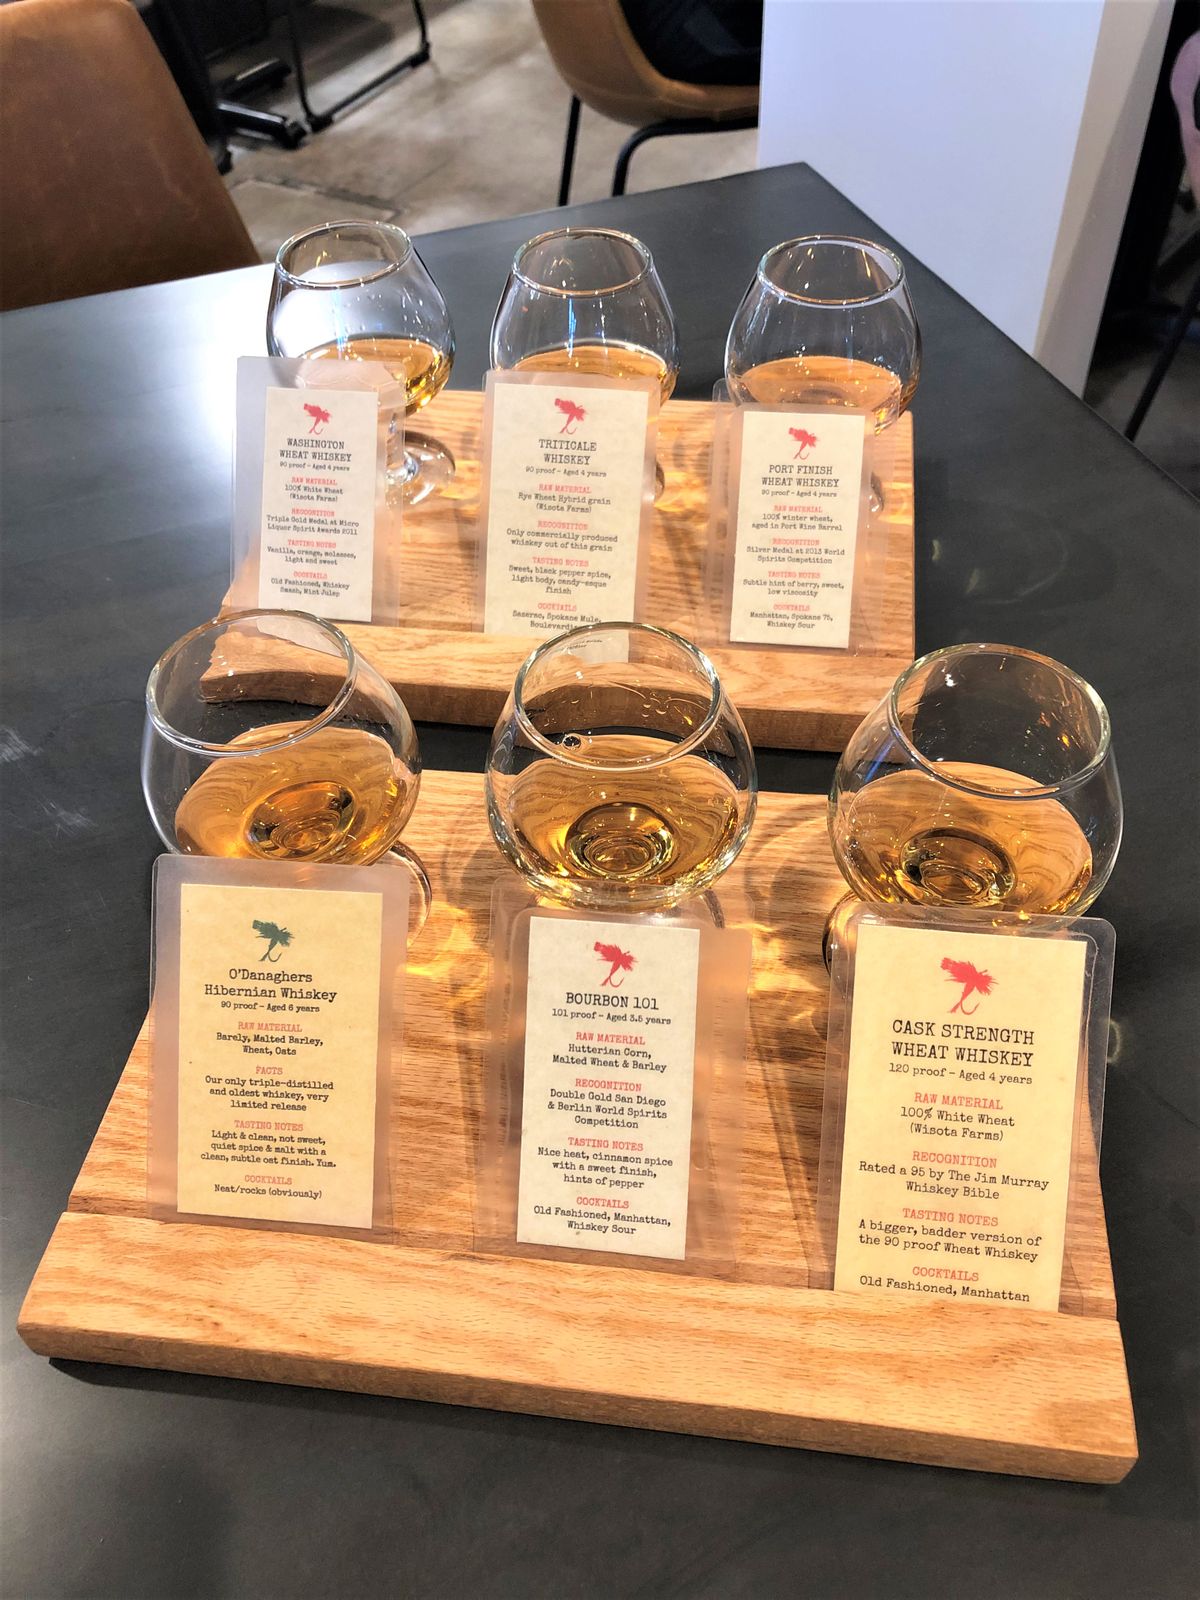 Dry Fly Distilling opened to the public on Riverside Avenue downtown last Thursday. Two flights of whiskey tastings are pictured here.  (Don Chareunsy/The Spokesman-Review)